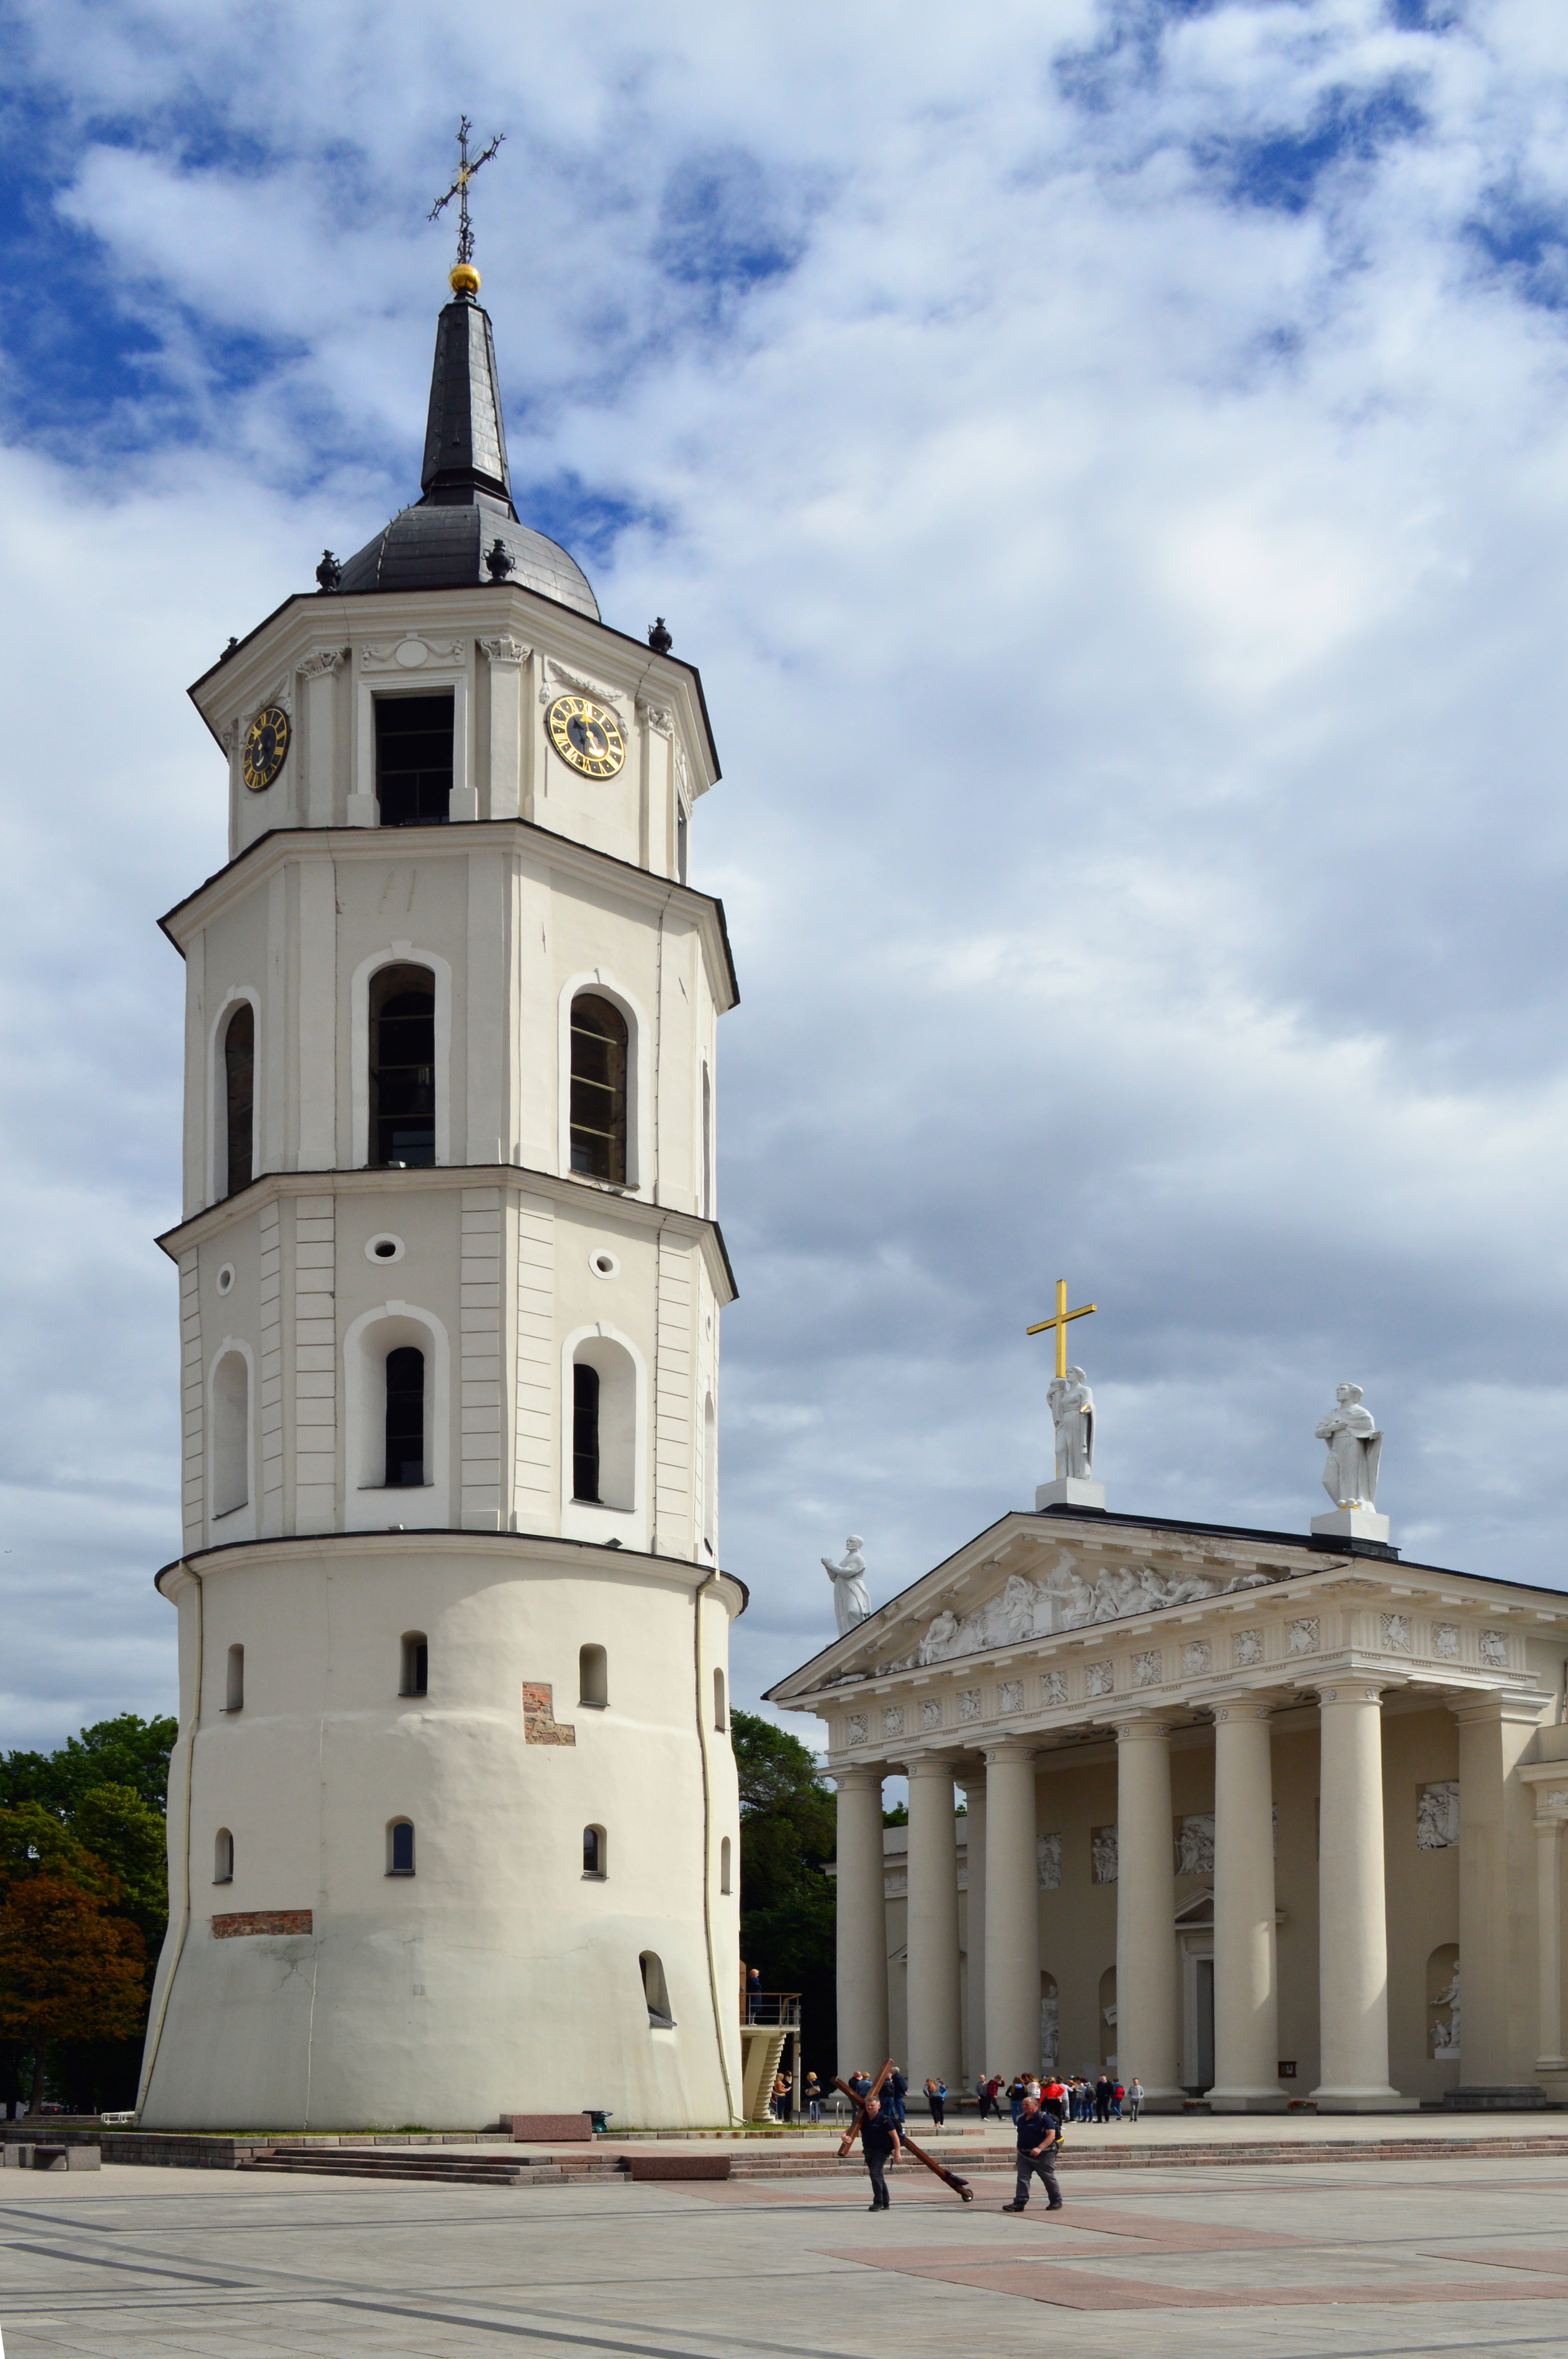 Vilnius: Navigating the Challenges of Modernization While Preserving its Rich History